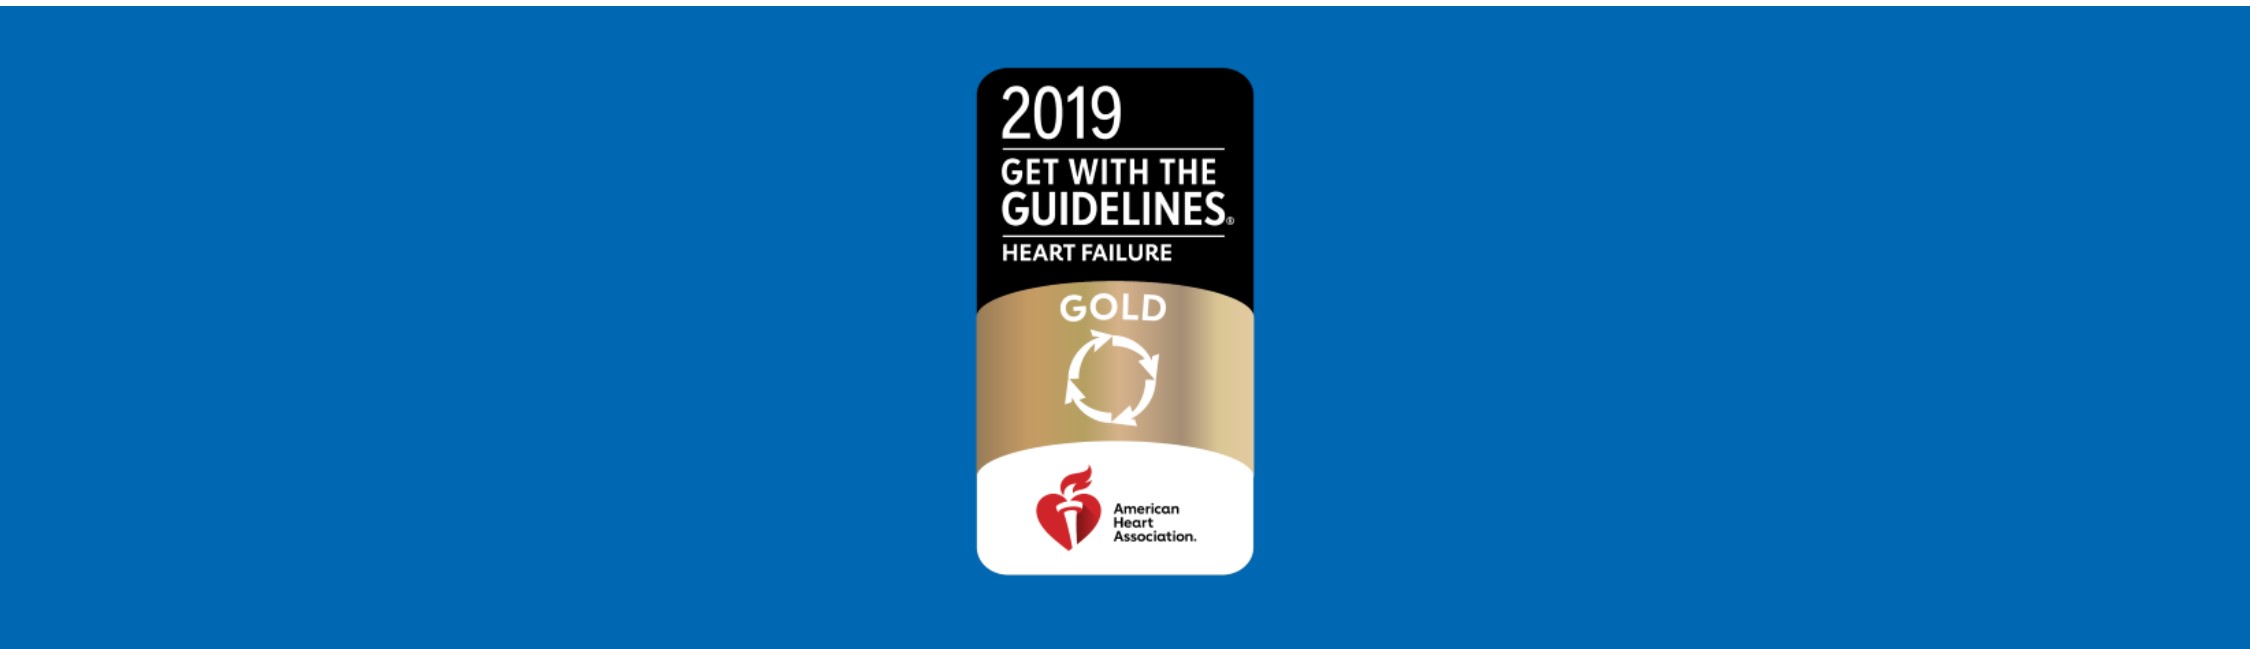 Get With The Guidelines-Heart Failure Gold Quality Achievement Award